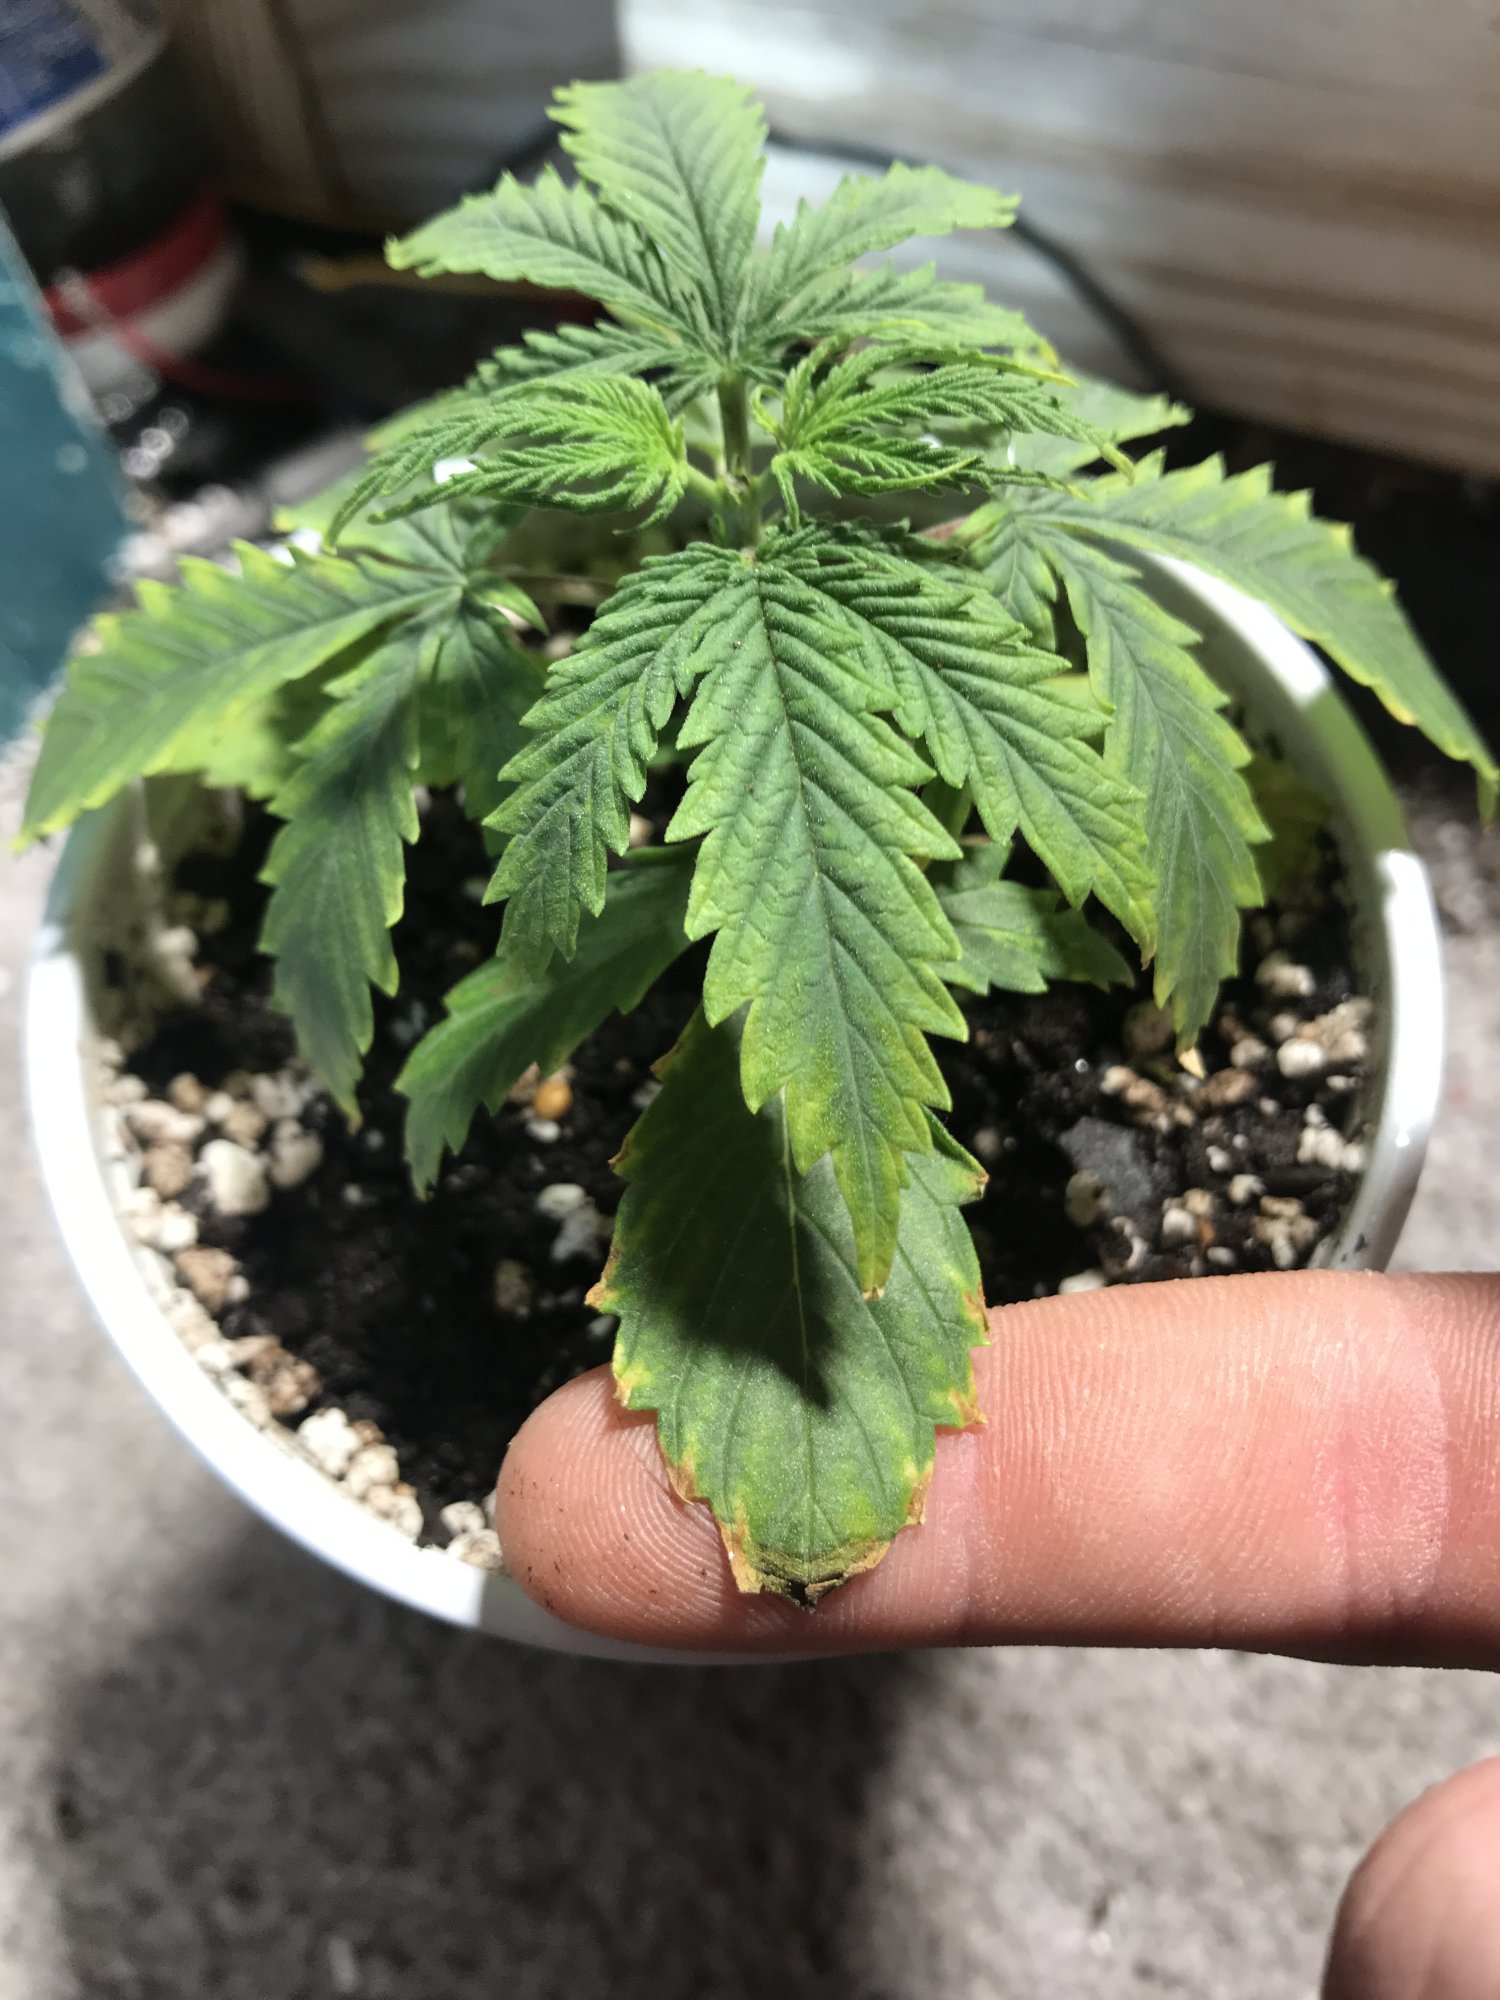 Can some one tell me what is wrong with my plant 2